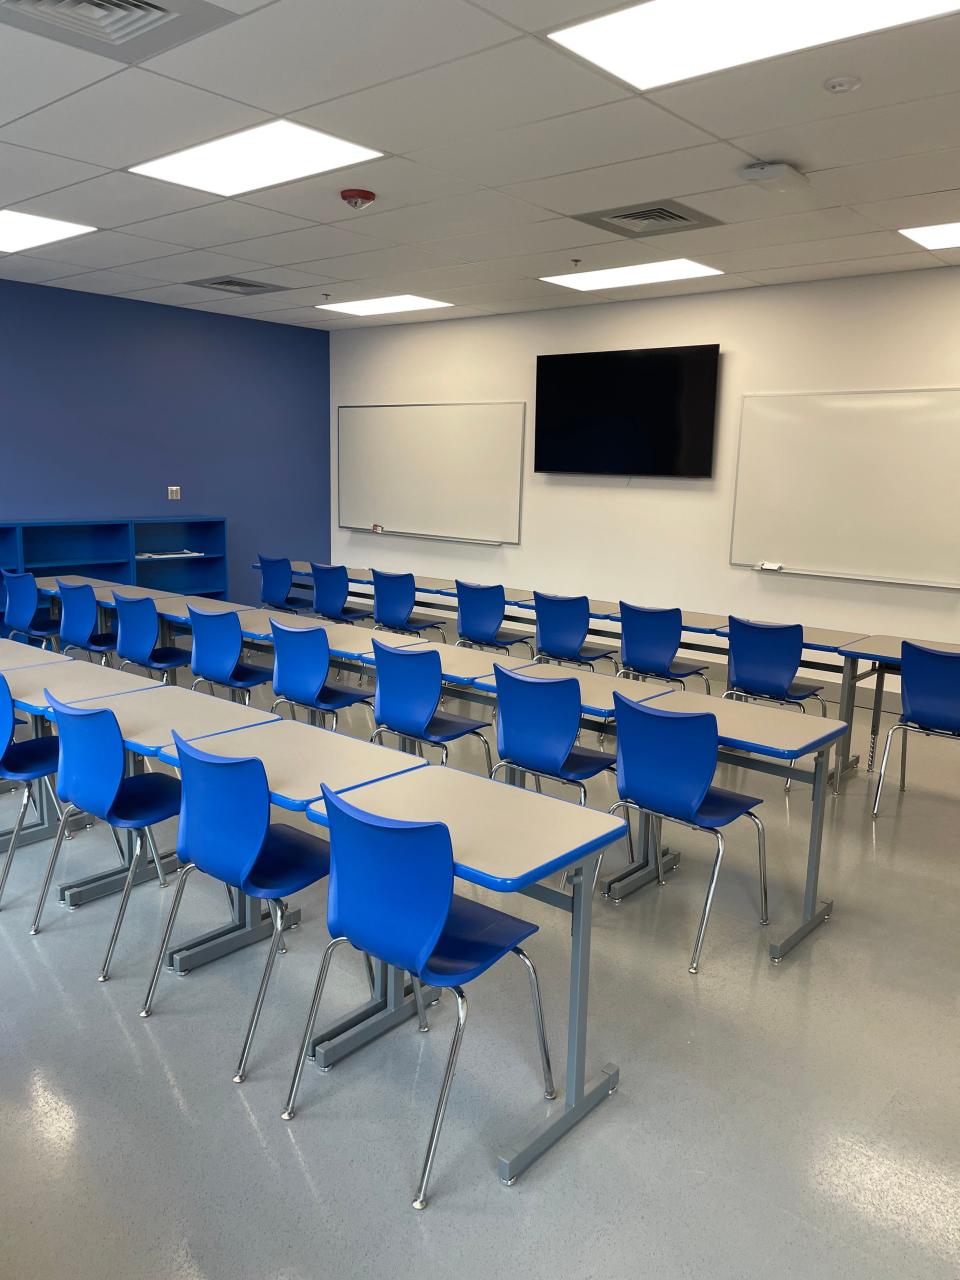 A state-of-art classroom at the G.R.A.C.E. Center.